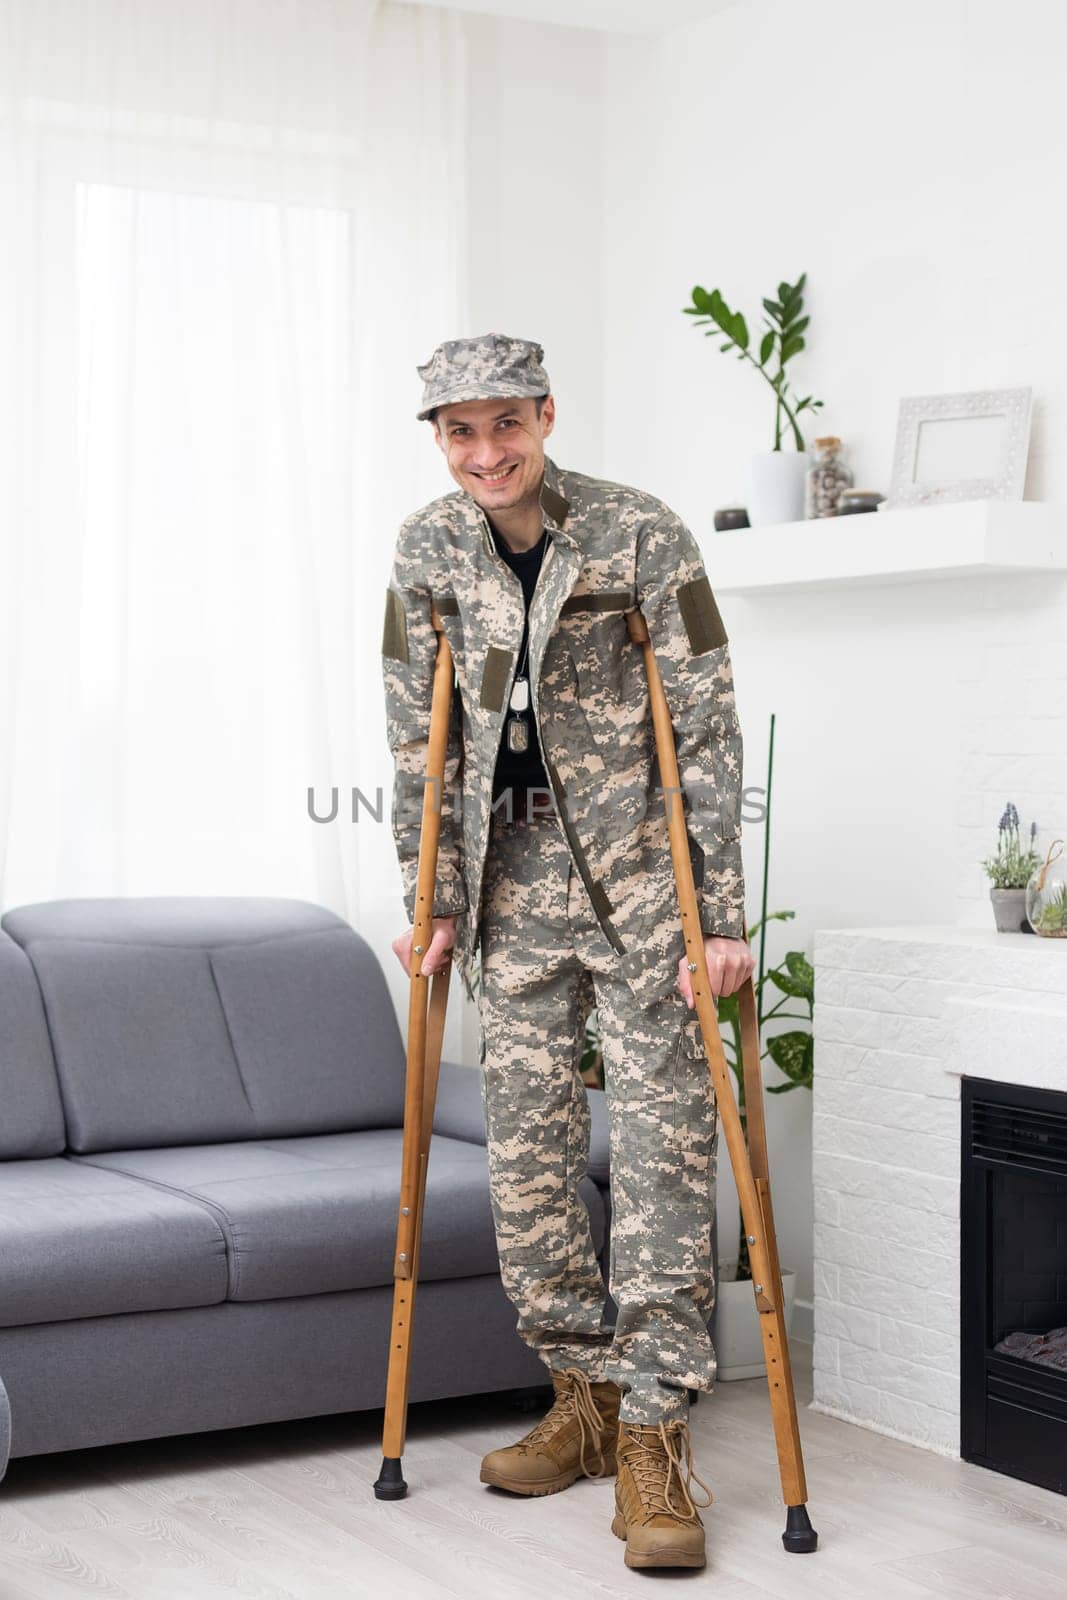 military man with crutches, disability by Andelov13